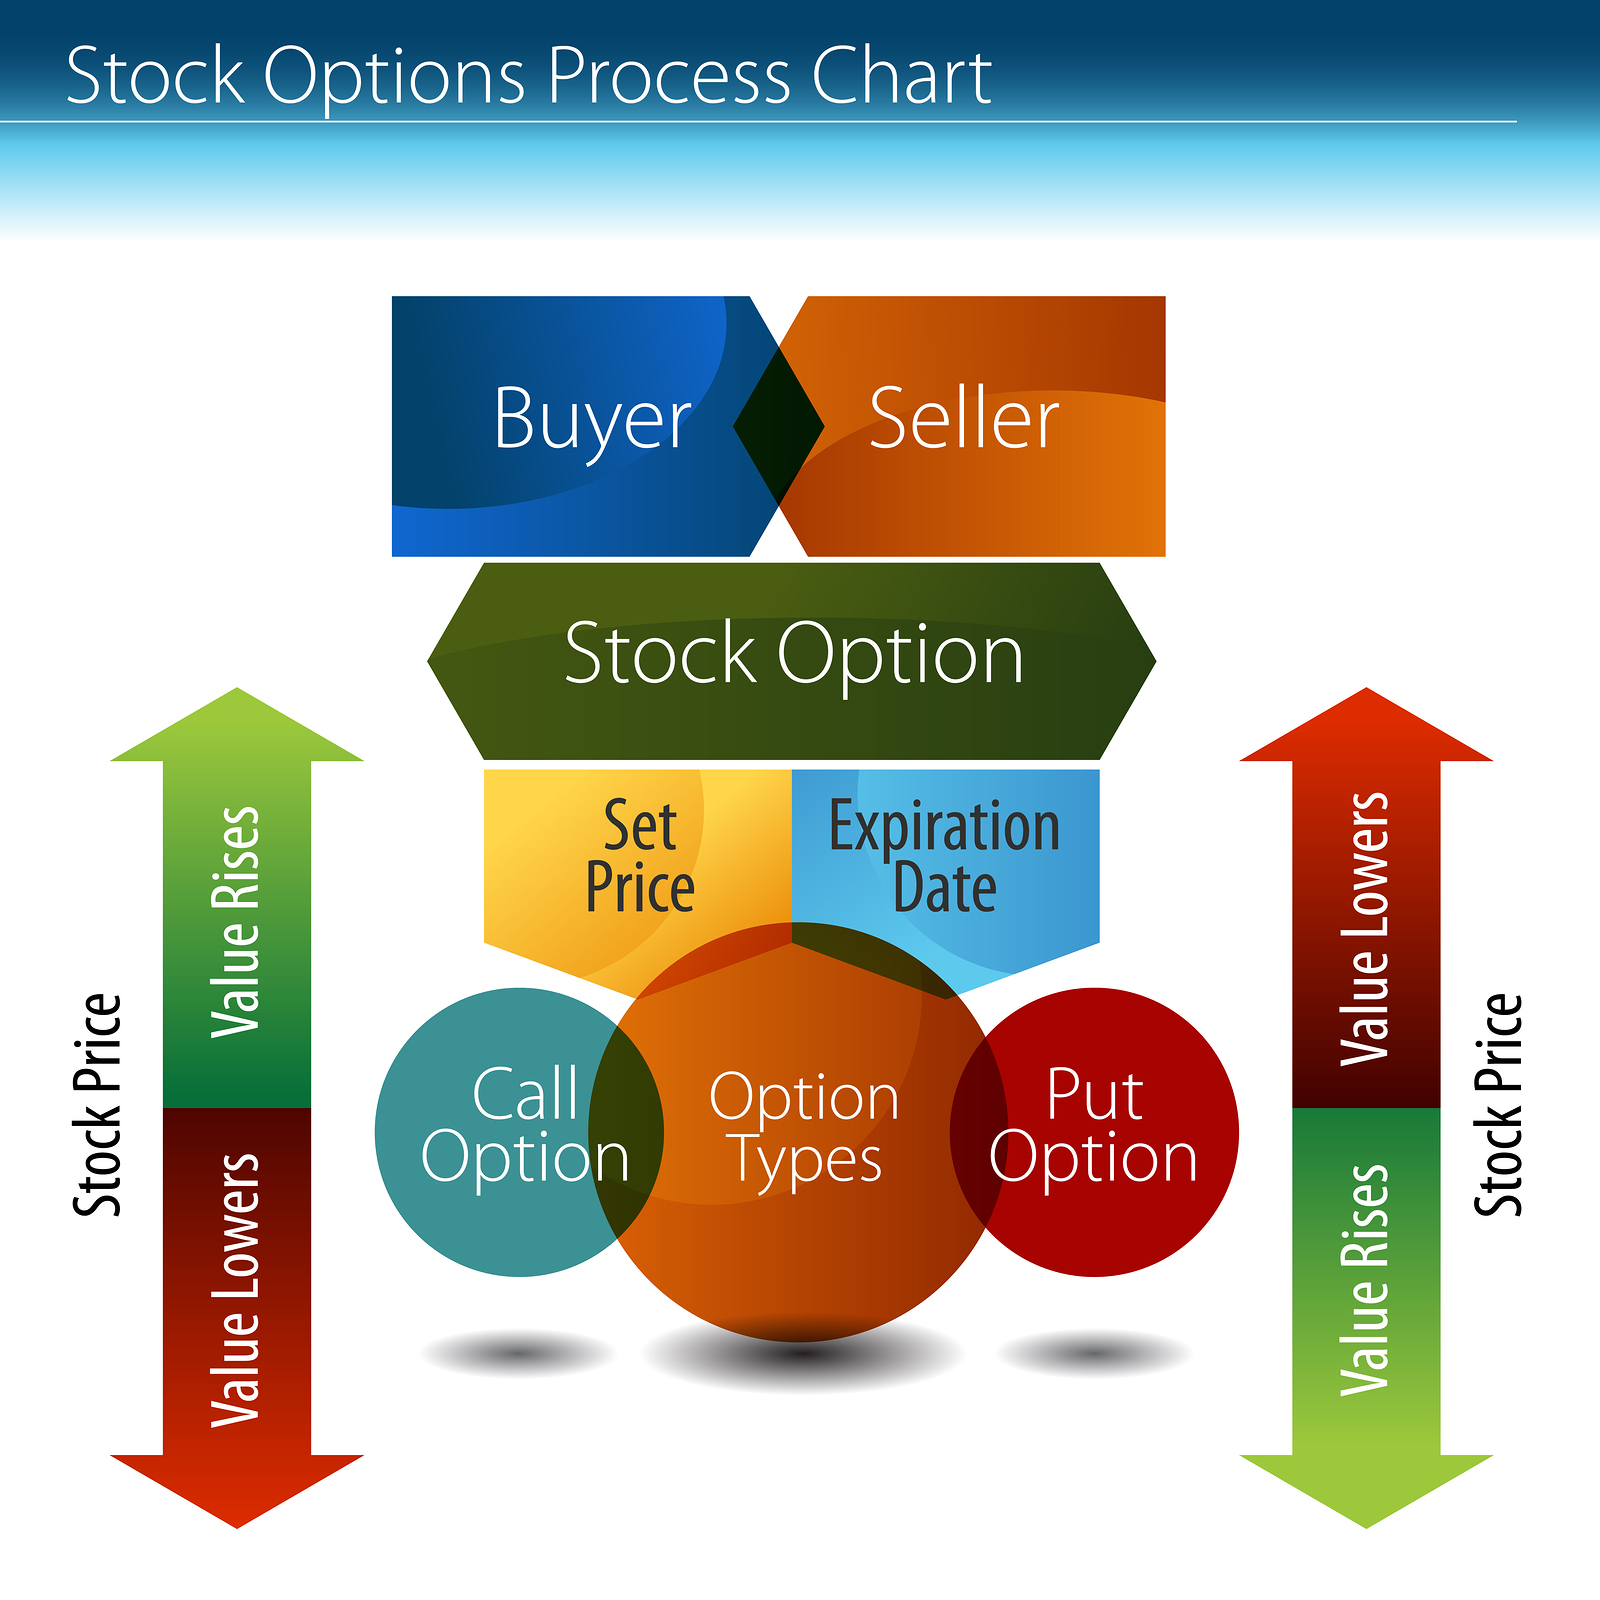 An image of a stock options process chart.